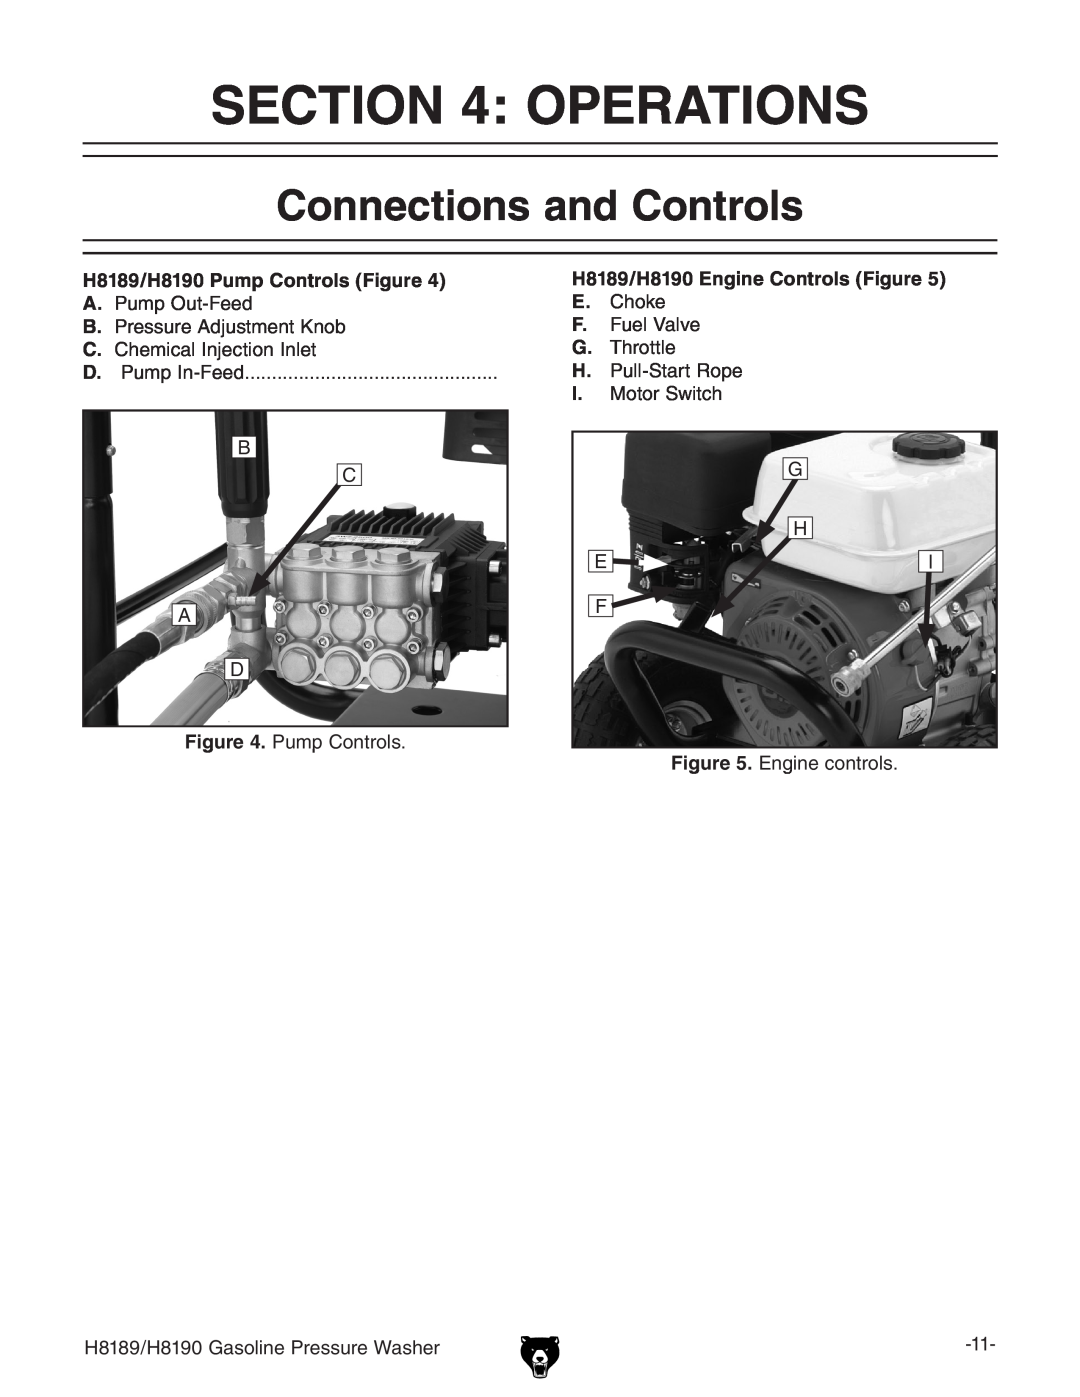 Grizzly H8189/H8190 owner manual Operations, Connections and Controls 